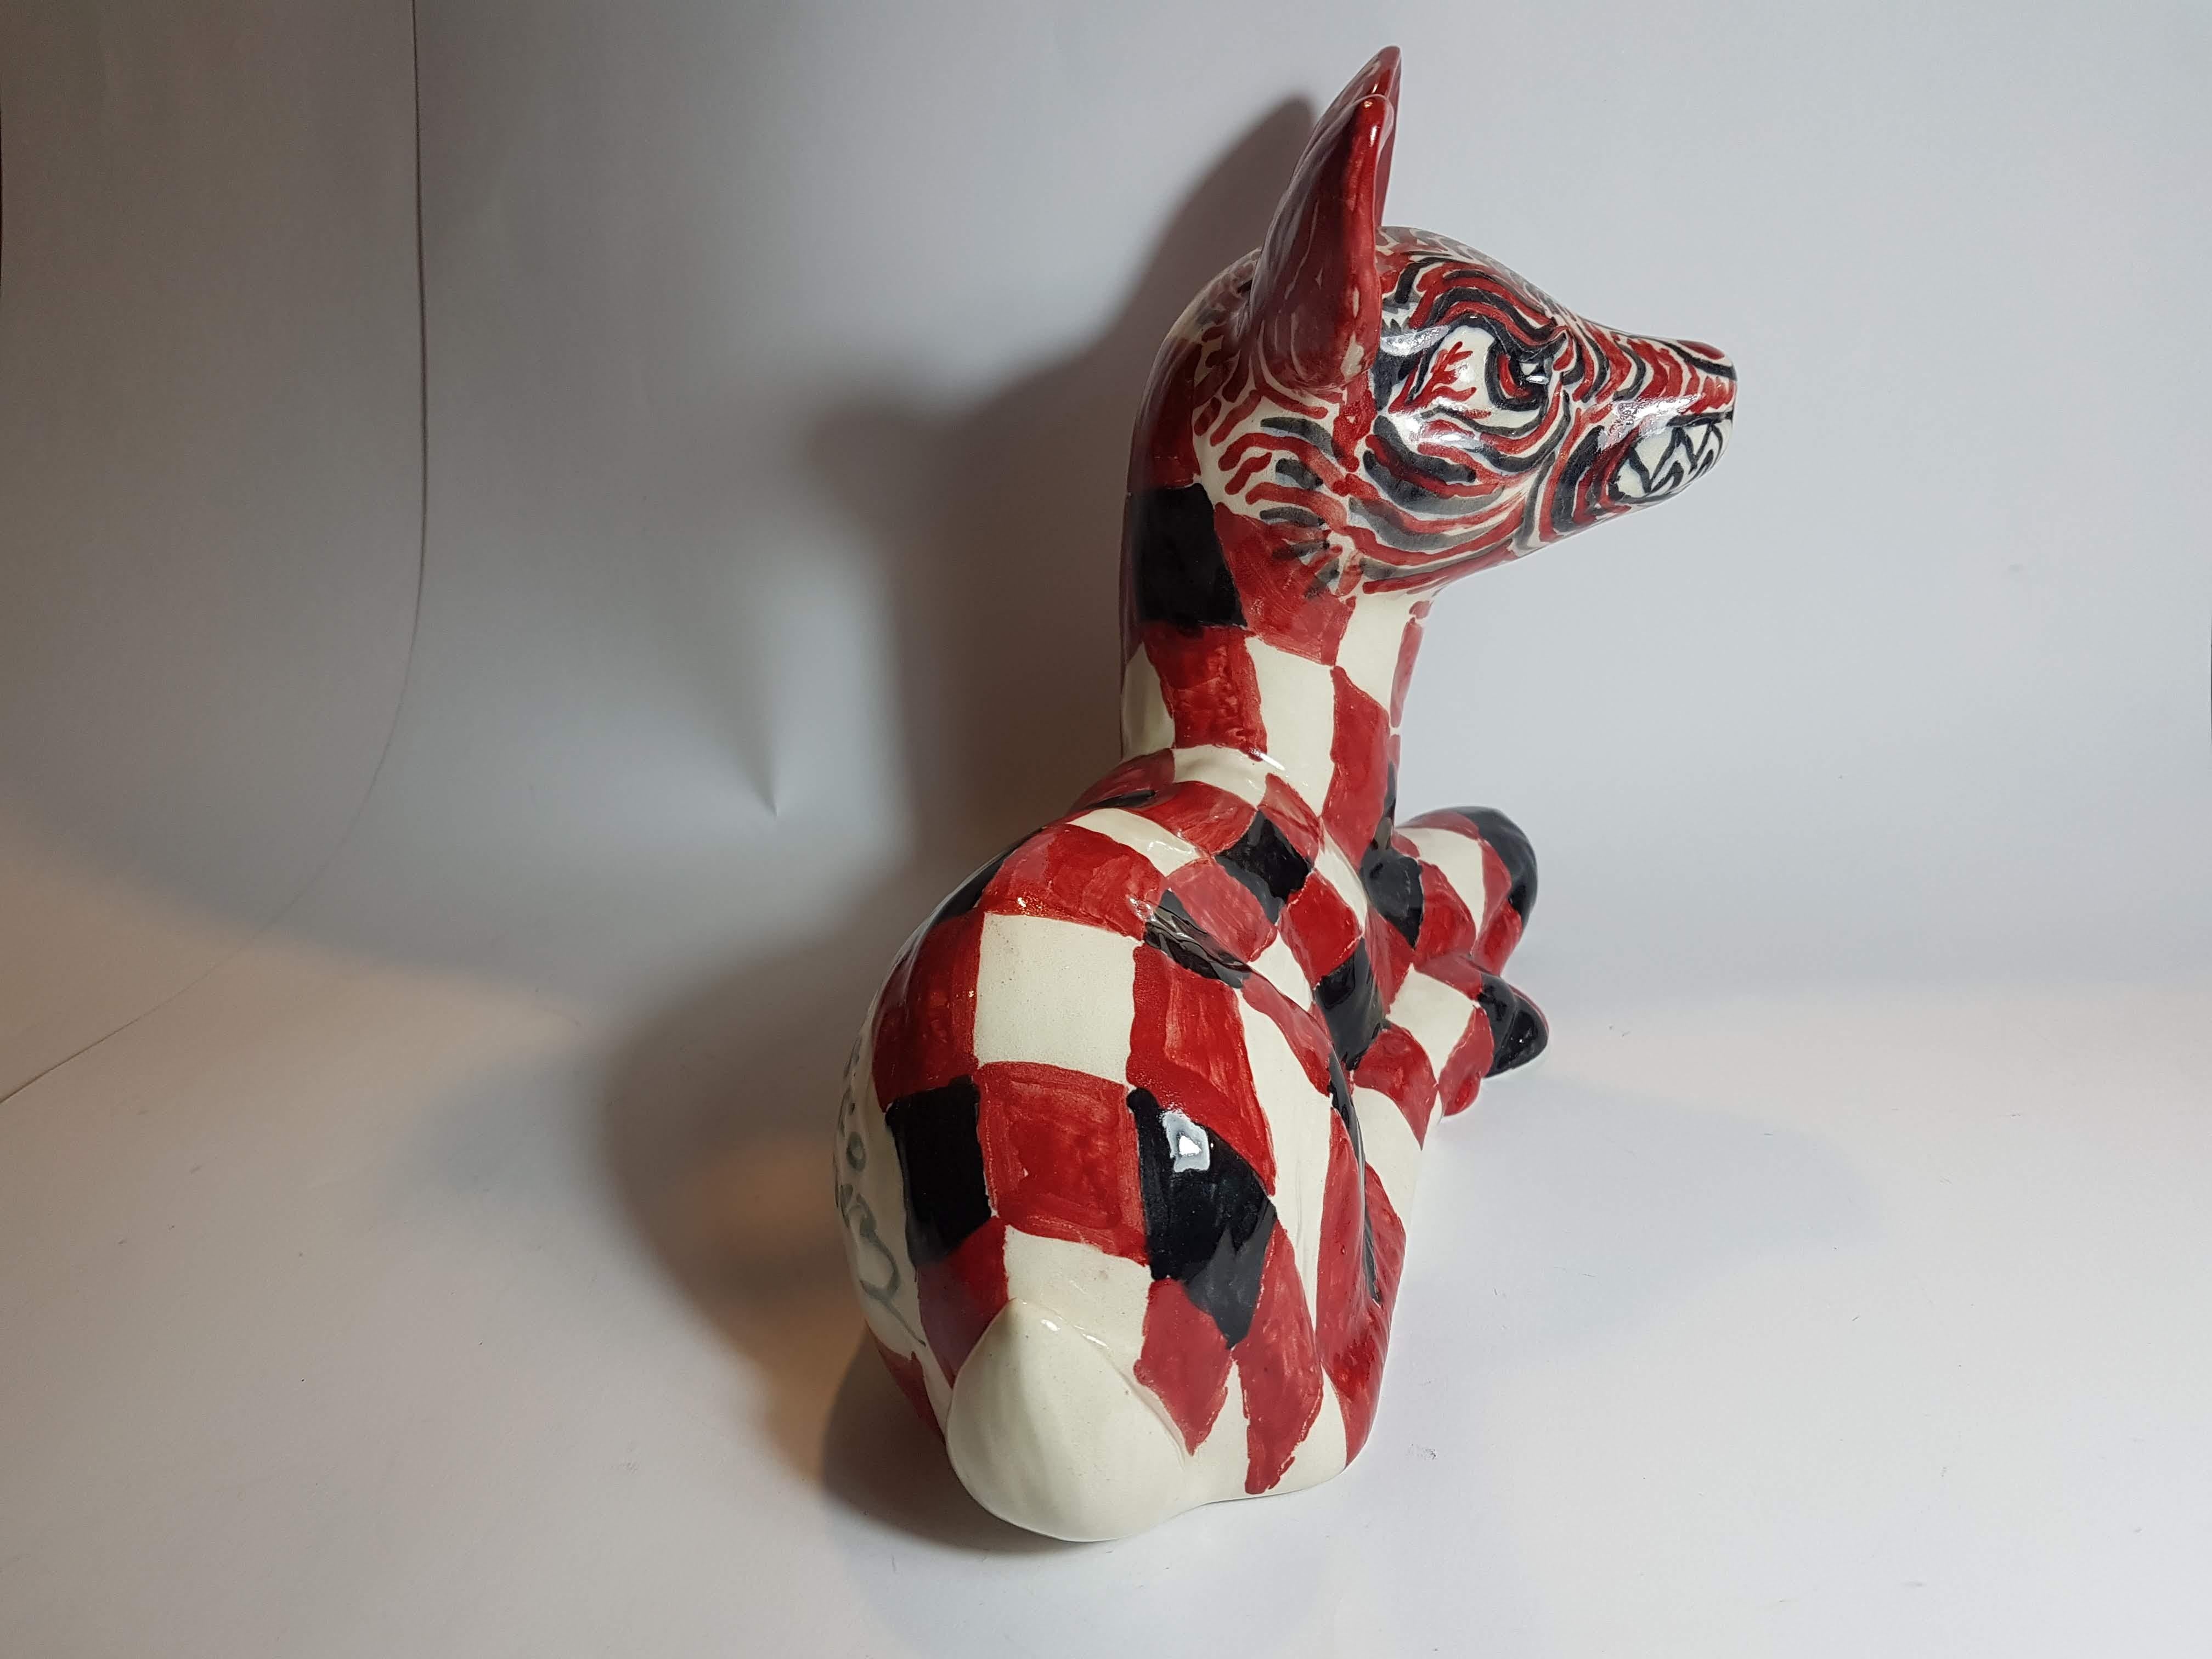 A striking ceramic deer with demonic face and checkered body. Hand painted by Mexican artist Cisco Jiménez. Signed and dated 2011.

Born in Cuernavaca, México in 1969, Cisco Jiménez is a multidisciplinary artist whose body of work includes painting,